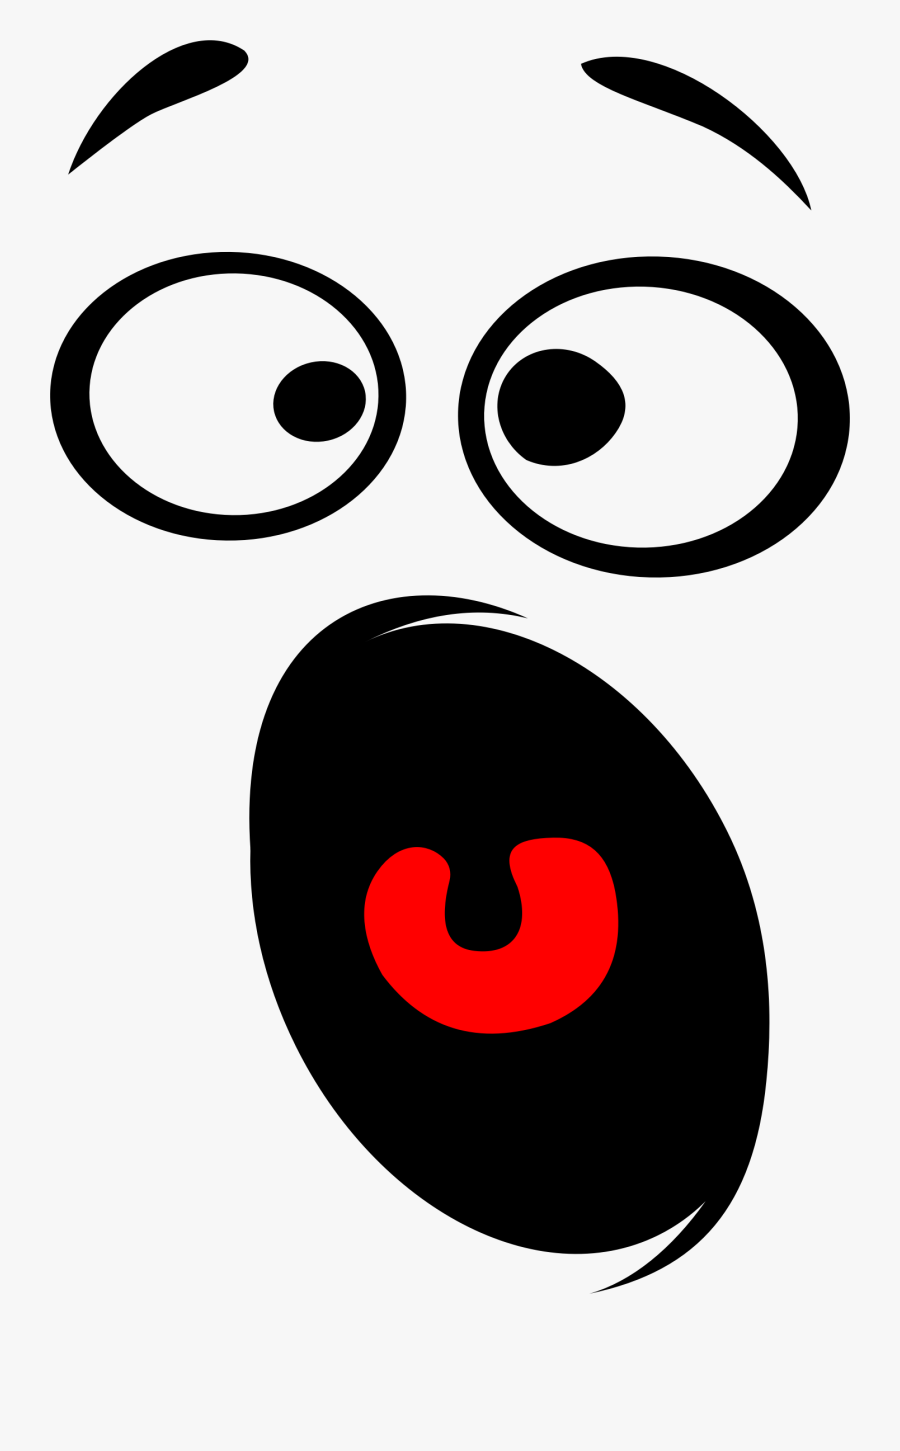 Scared Face Clipart Horrified Smiley Face Silhouette - Scared Face No Background, Transparent Clipart